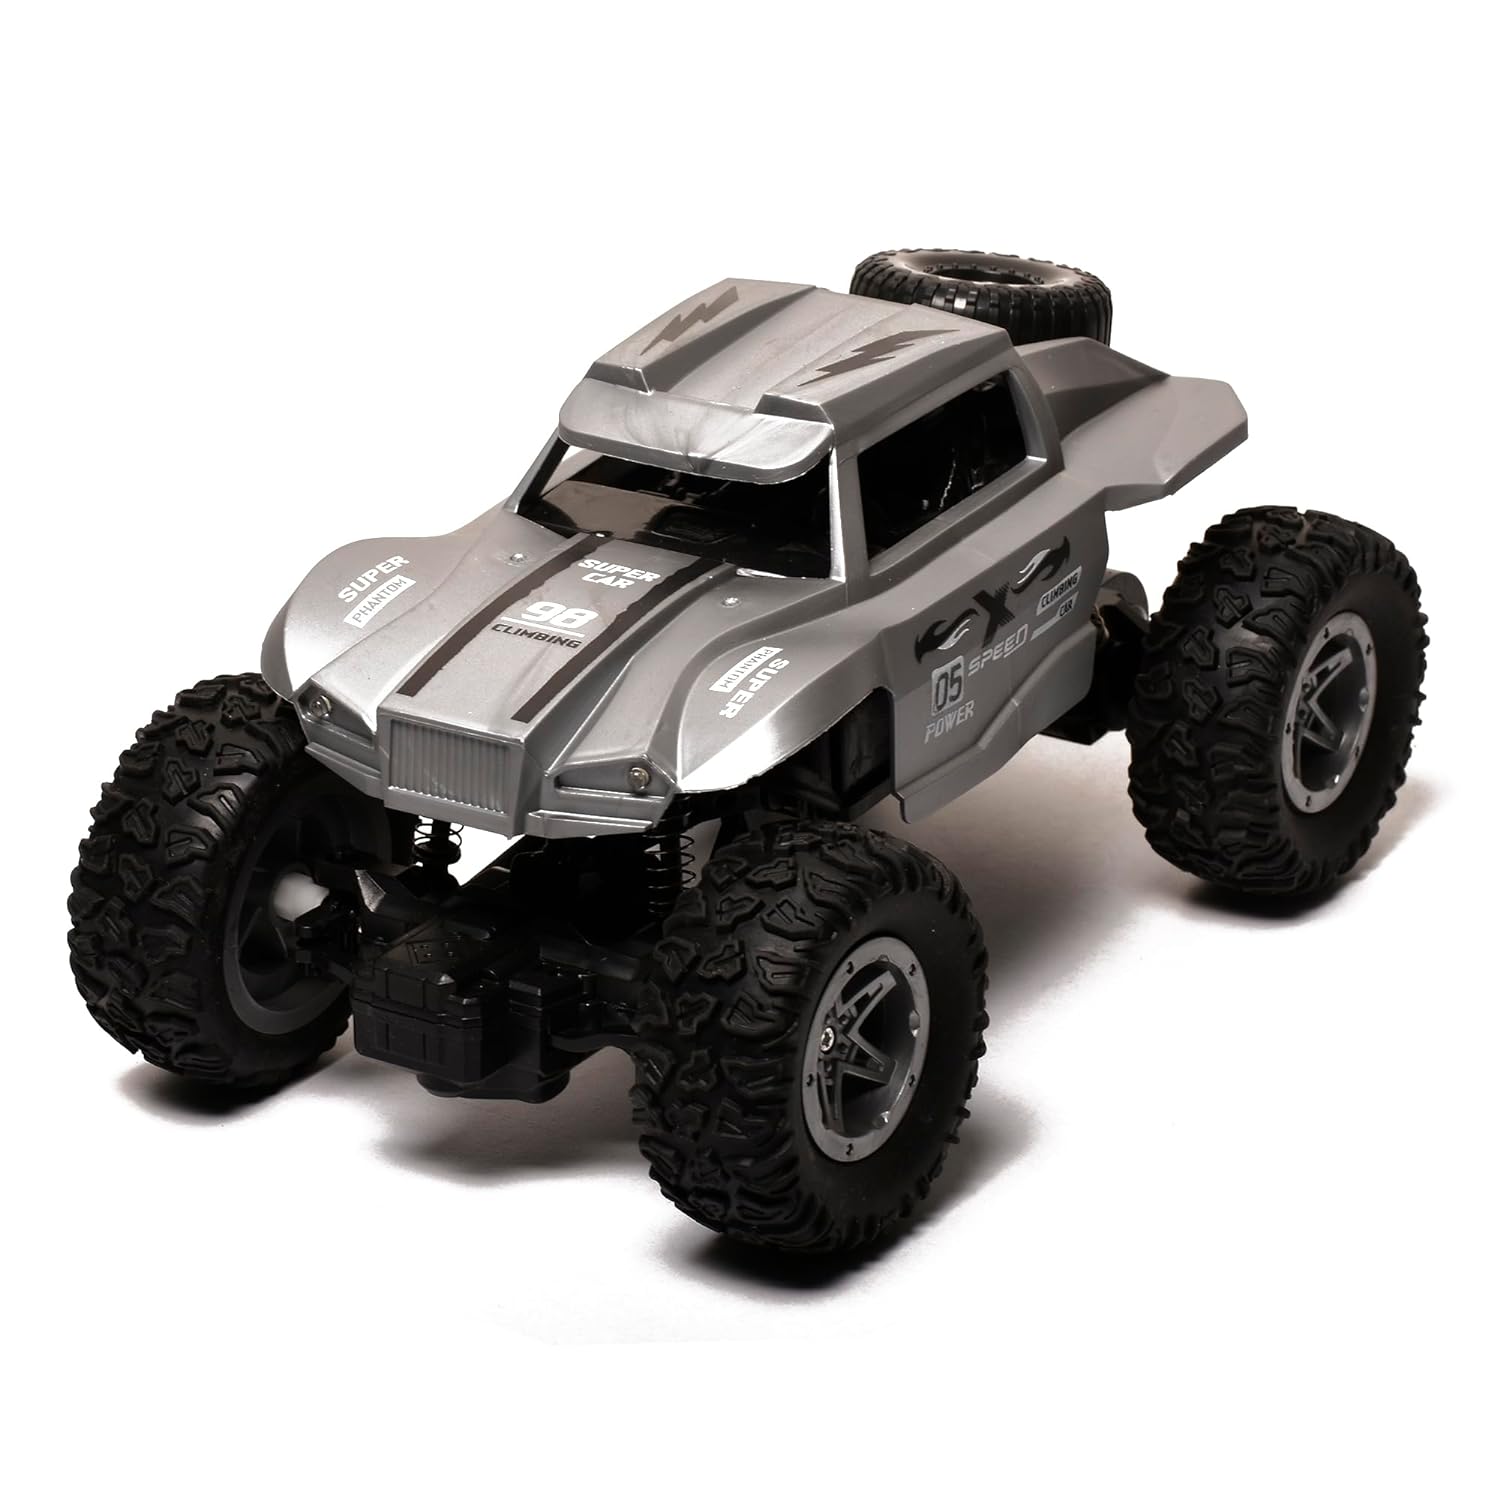 Braintastic Rechargeable 4 Wheel Metal Alloy Phantom Climber Rock Crawler Remote Control RC Car Vehicle Toys for Kids Age 6+ Years